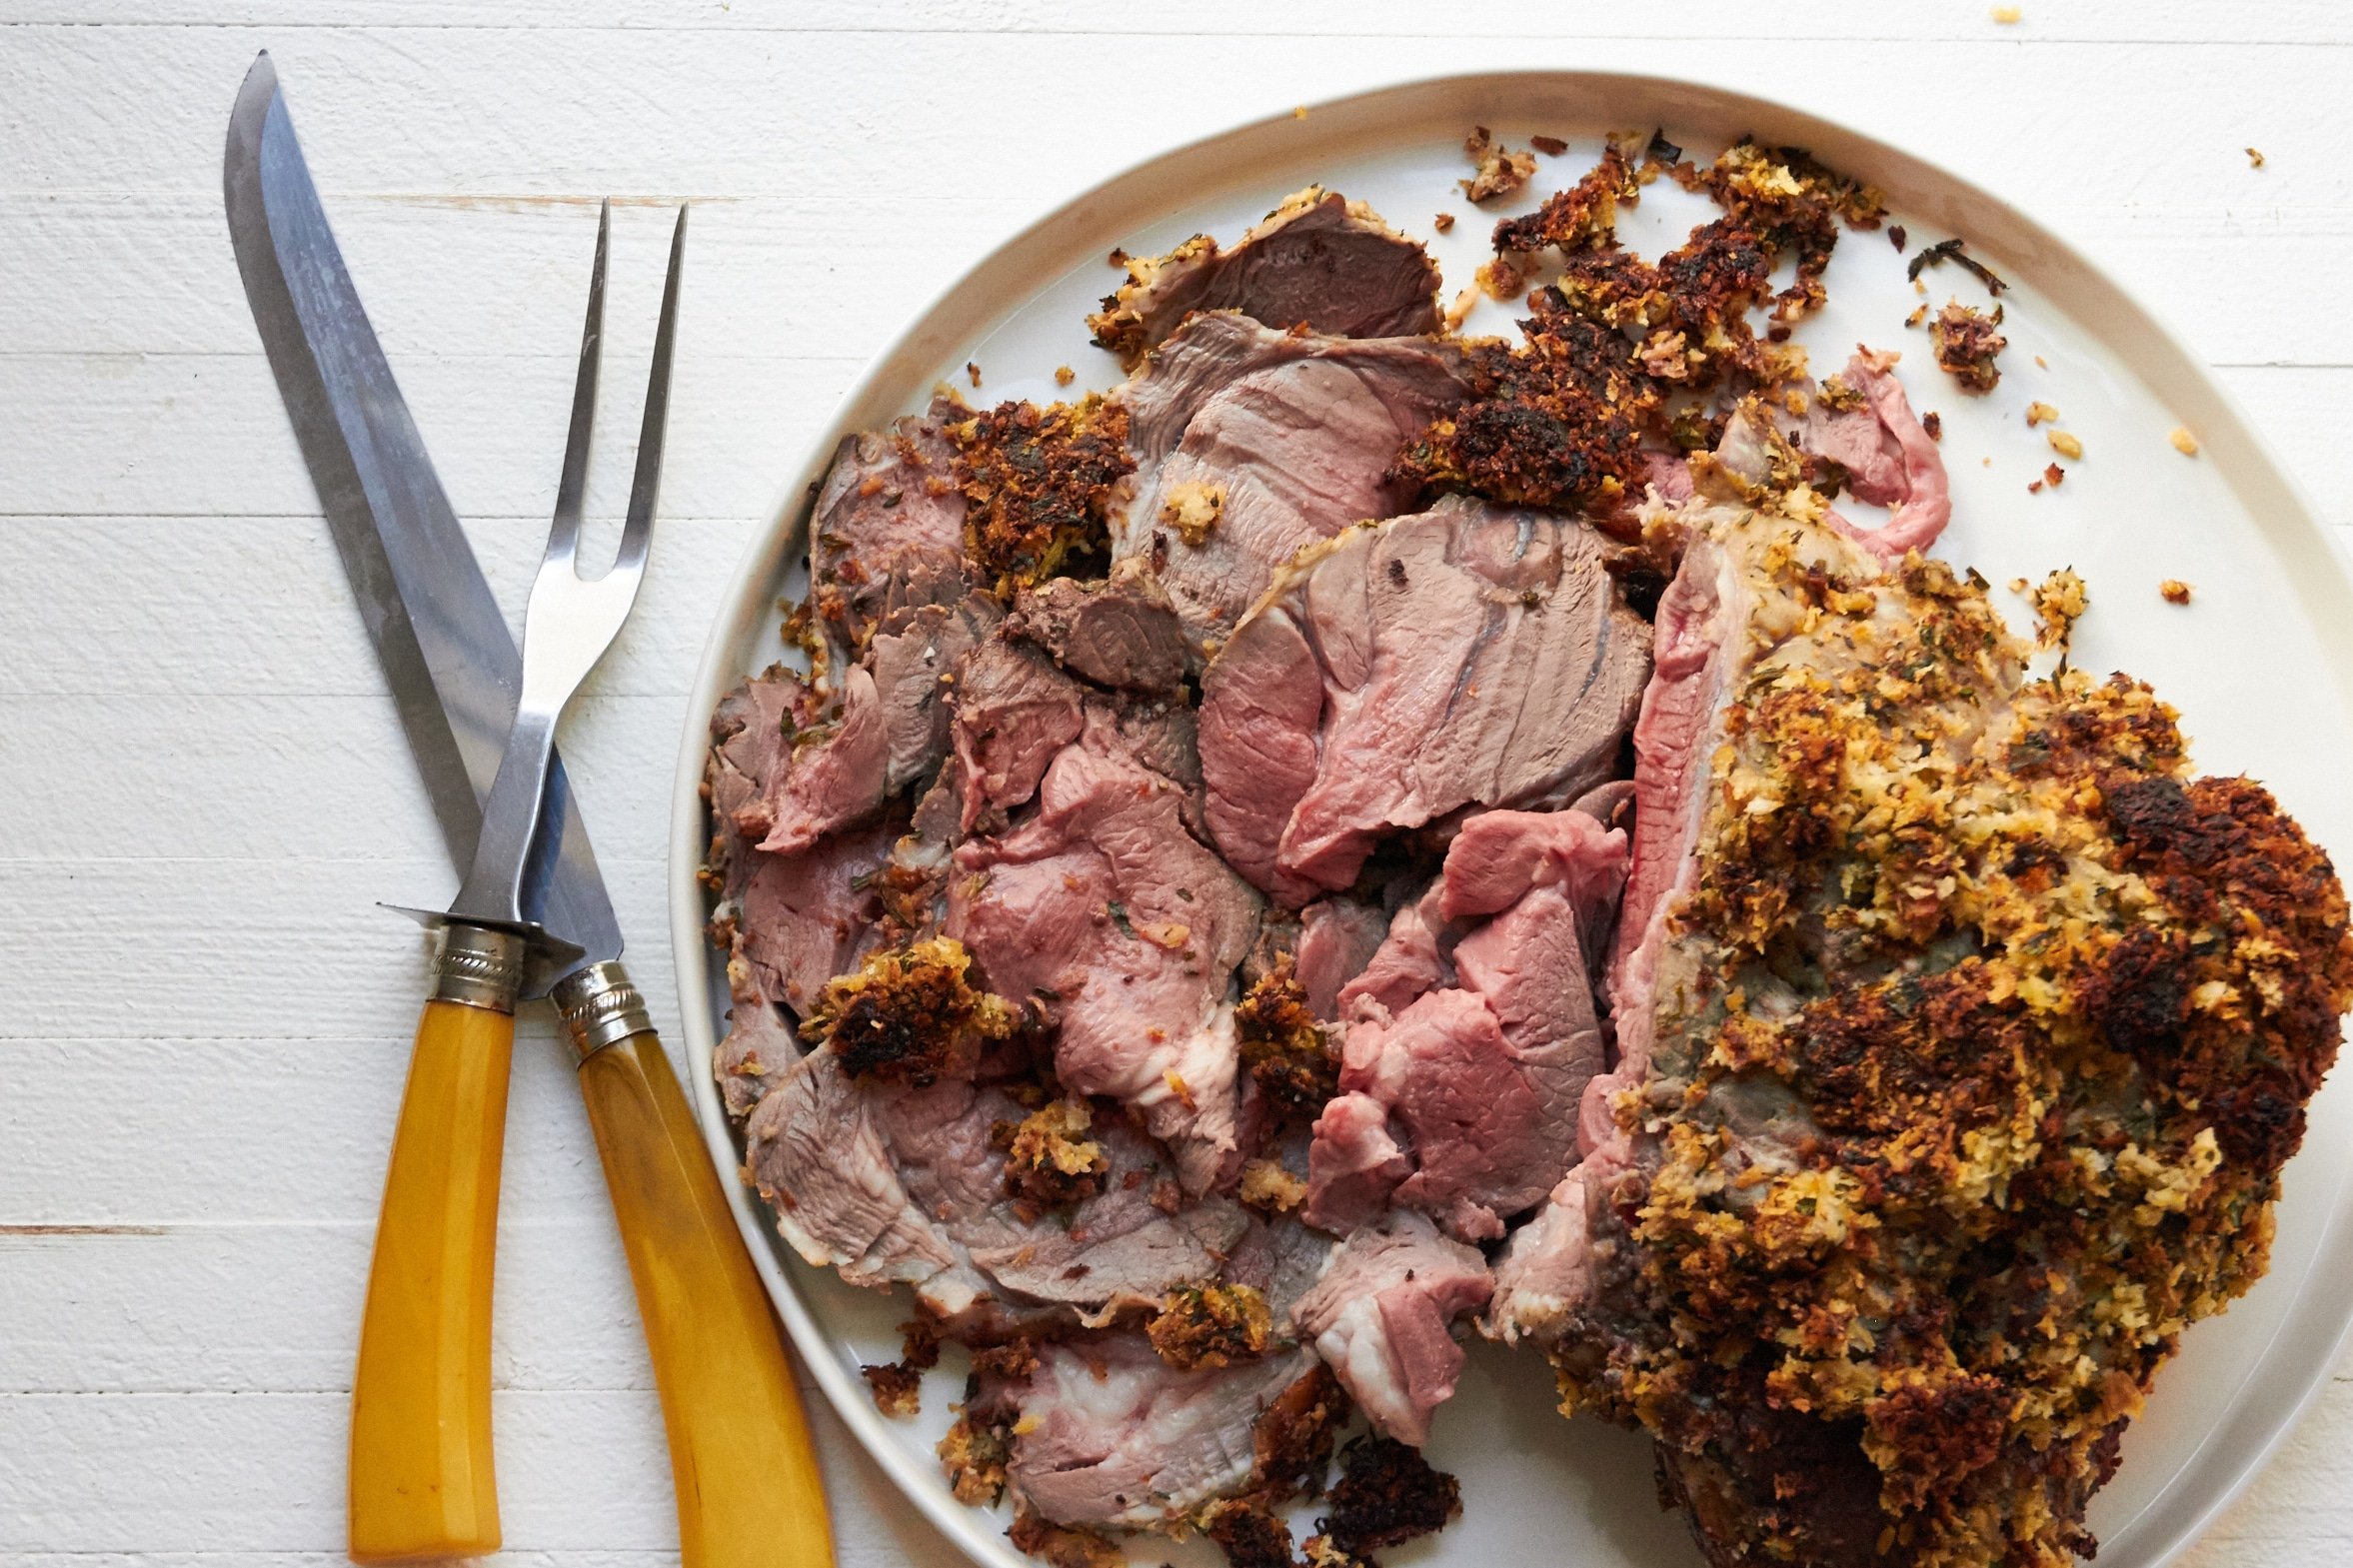 Partially-sliced Herbed Boneless Leg of Lamb with Mustard Crust on a platter.